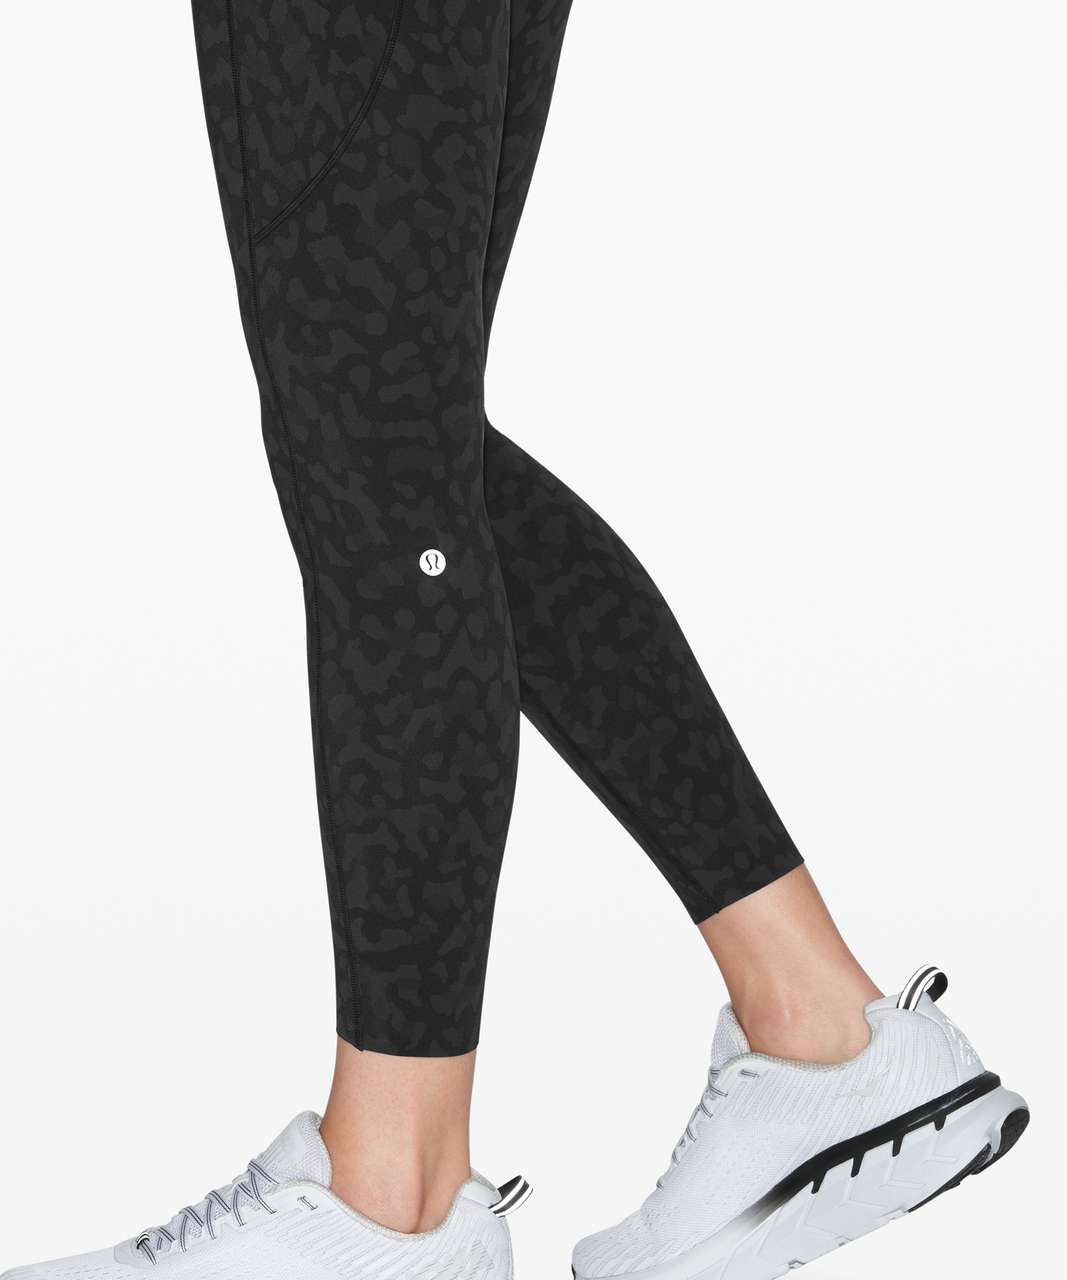 Lululemon Fast and Free Tight II 25" *Non-Reflective Nulux - Formation Camo Deep Coal Multi